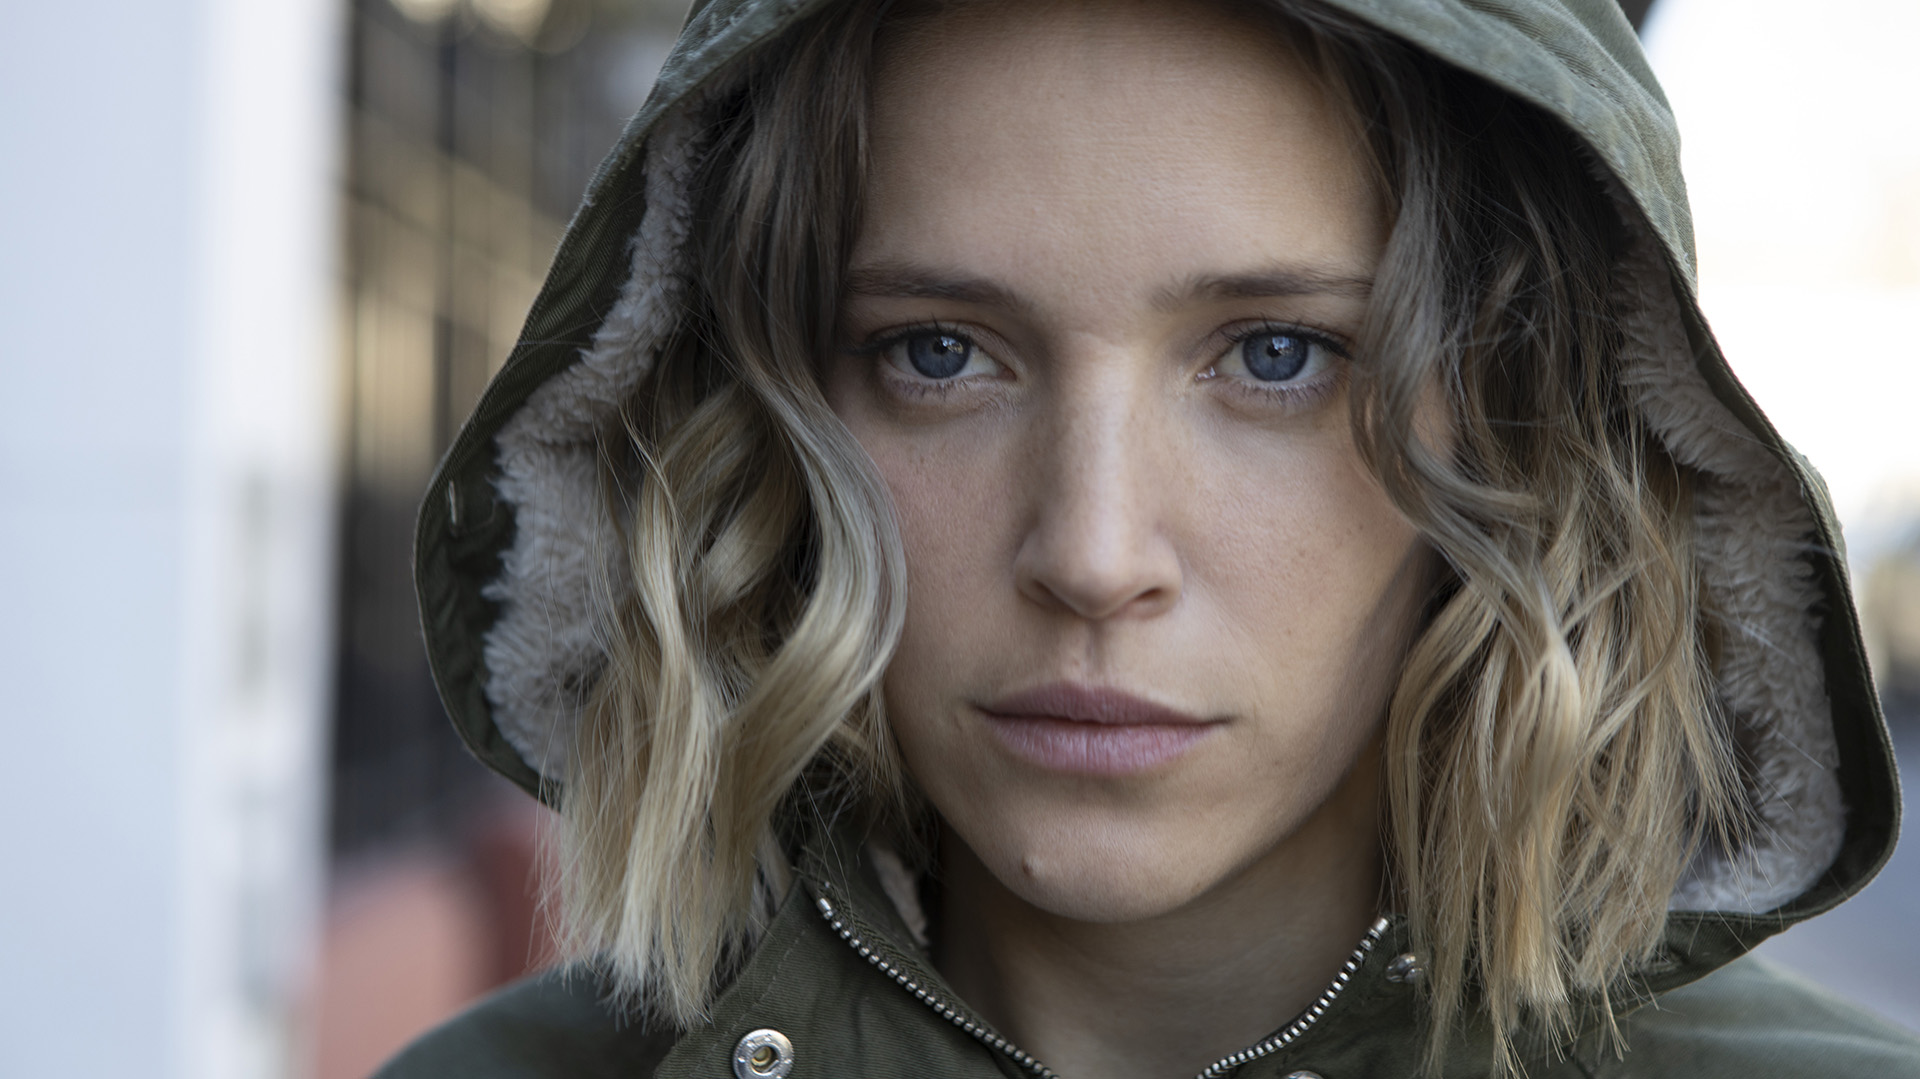 The story of "intuition" will continue on "Pipe" with Luisana Lopilato returning in the title role.  (Netflix)